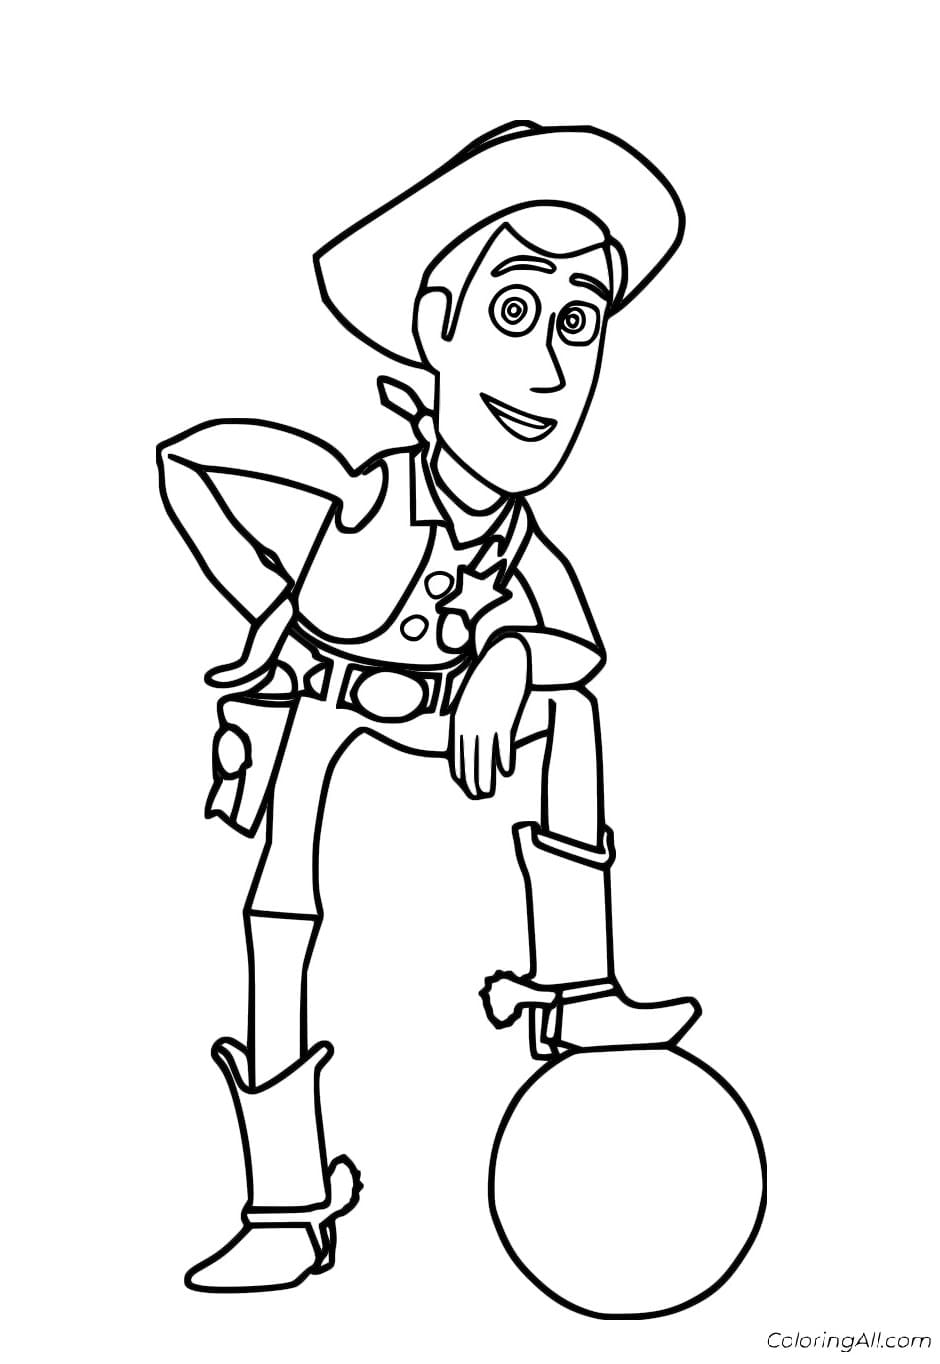 Woody And A Ball Coloring Page